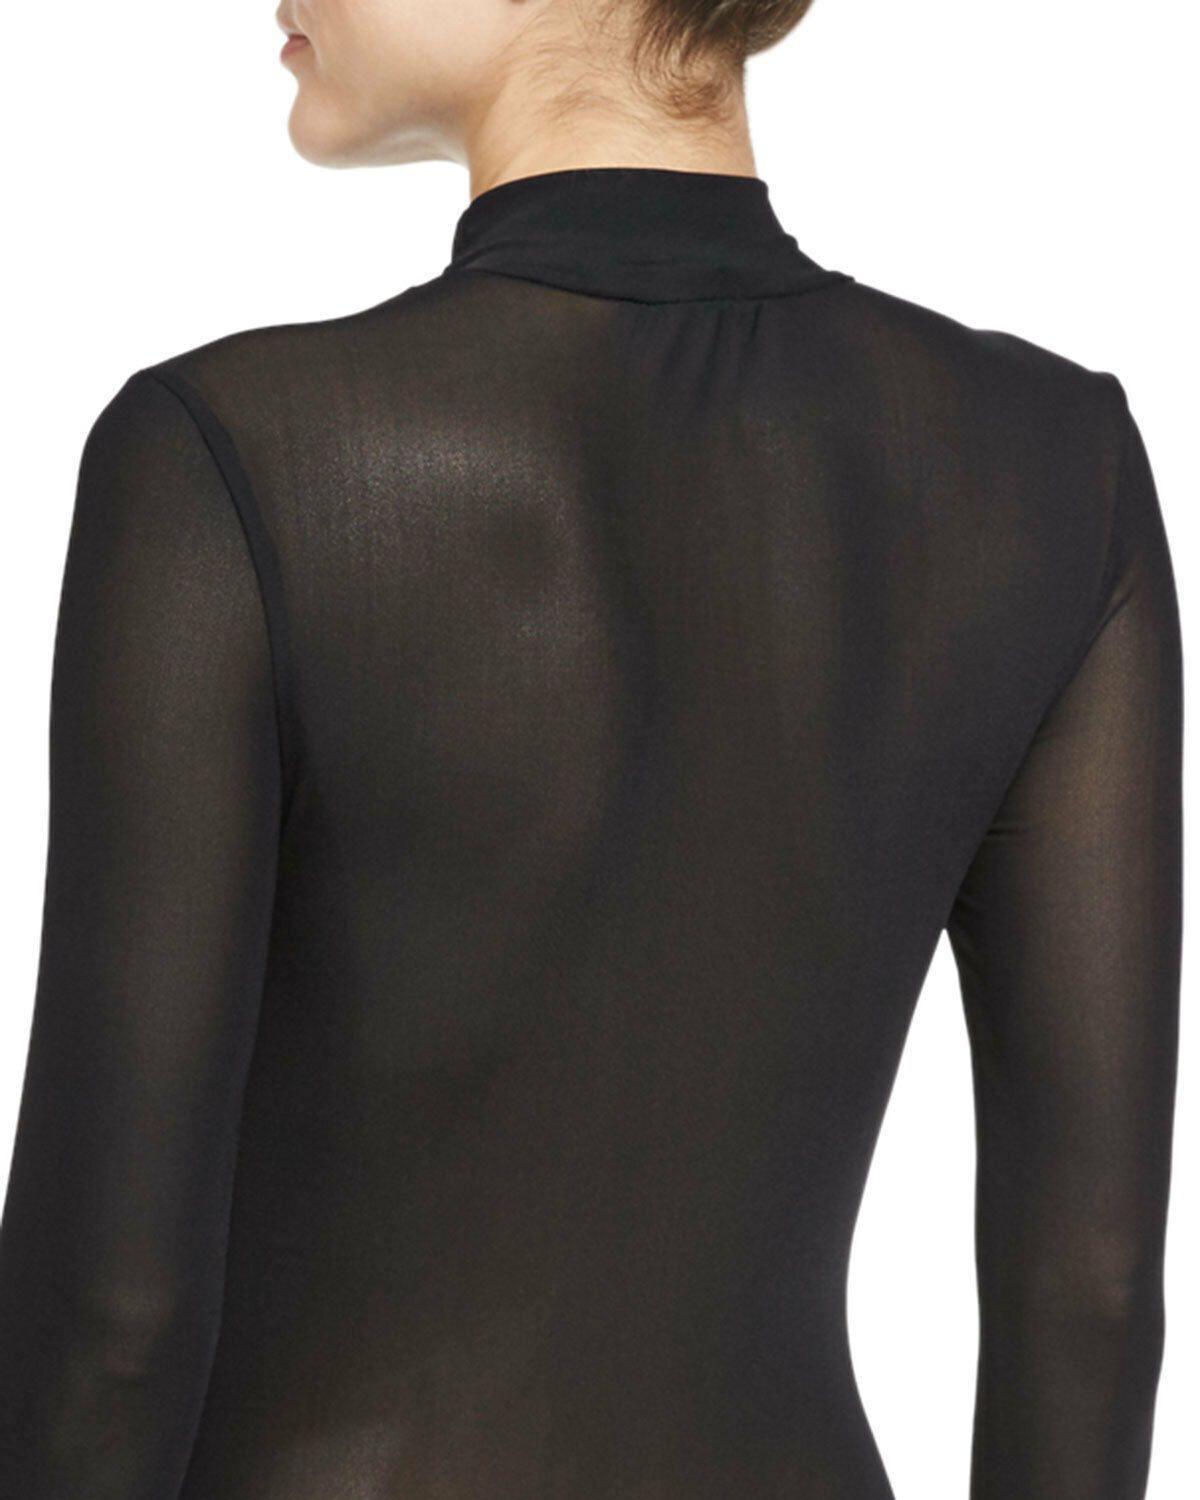 Romeo & Juliet Couture Long-Sleeve Mesh Bodysuit, Black Size S - SVNYFancy